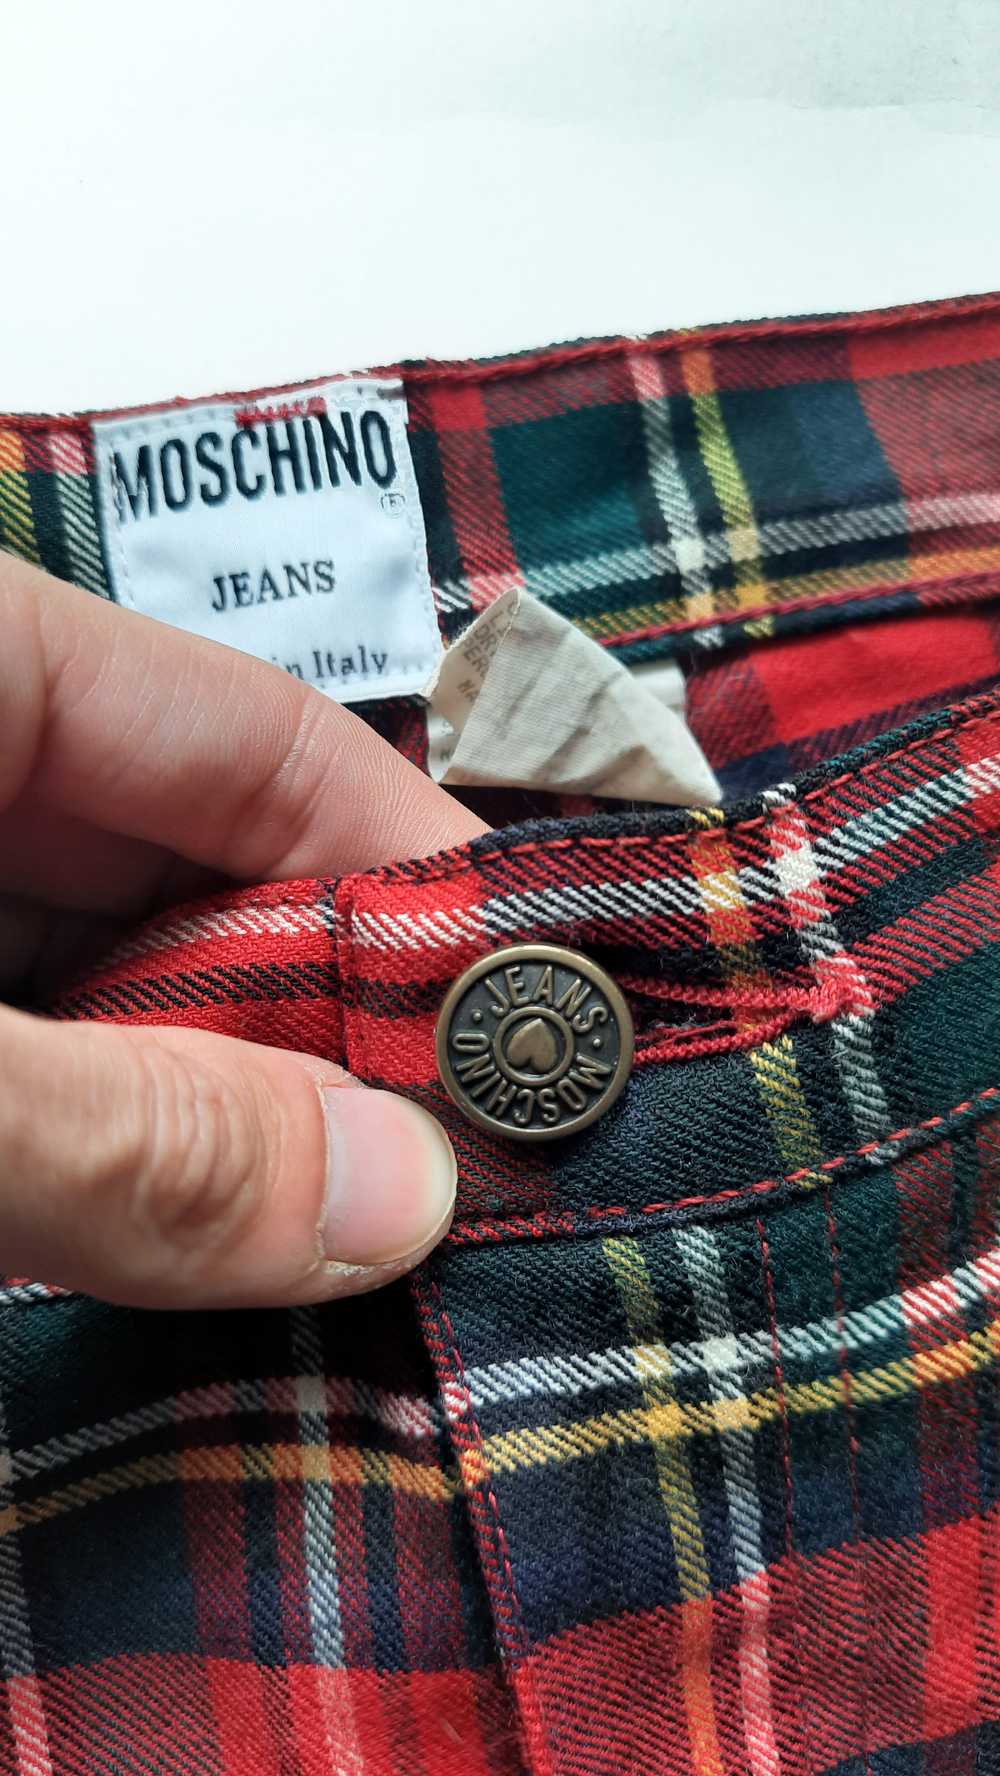 Vintage - Moschino Jeans Tartan Trousers - image 3